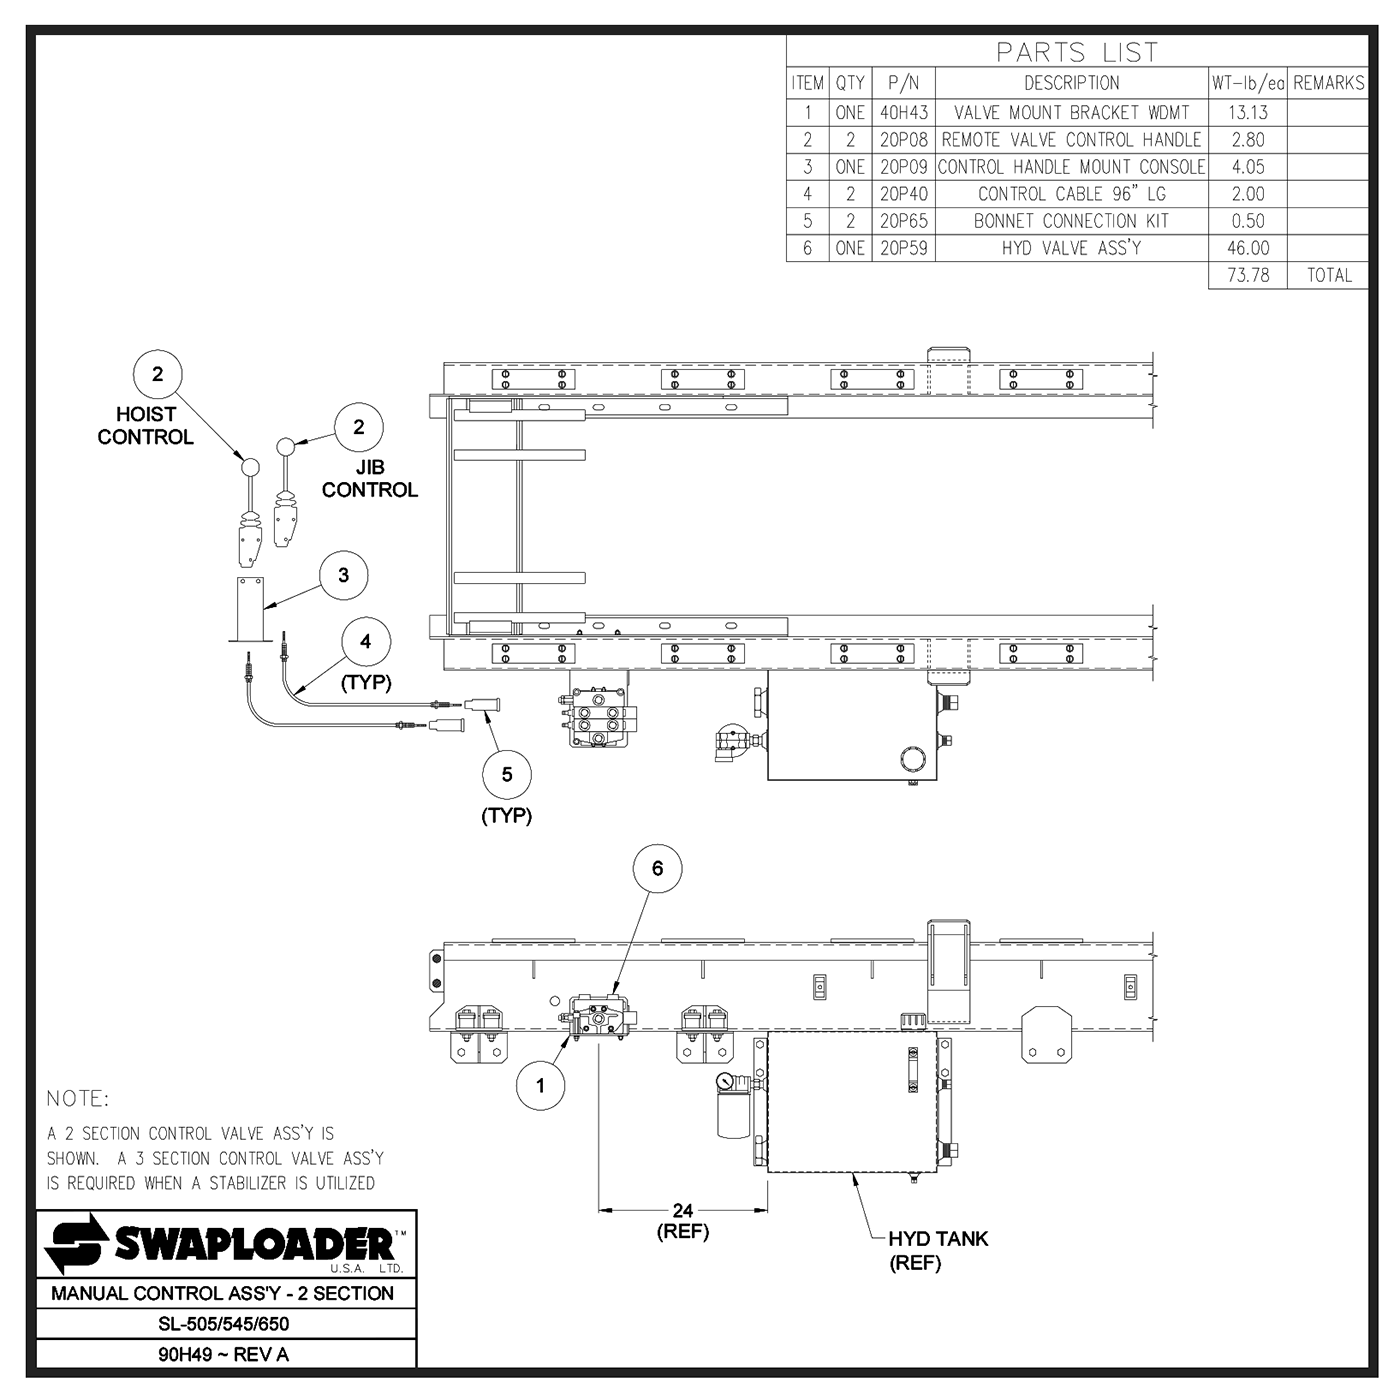 Swaploader Heavy-Duty Two-Section Manual Control Assembly Diagram